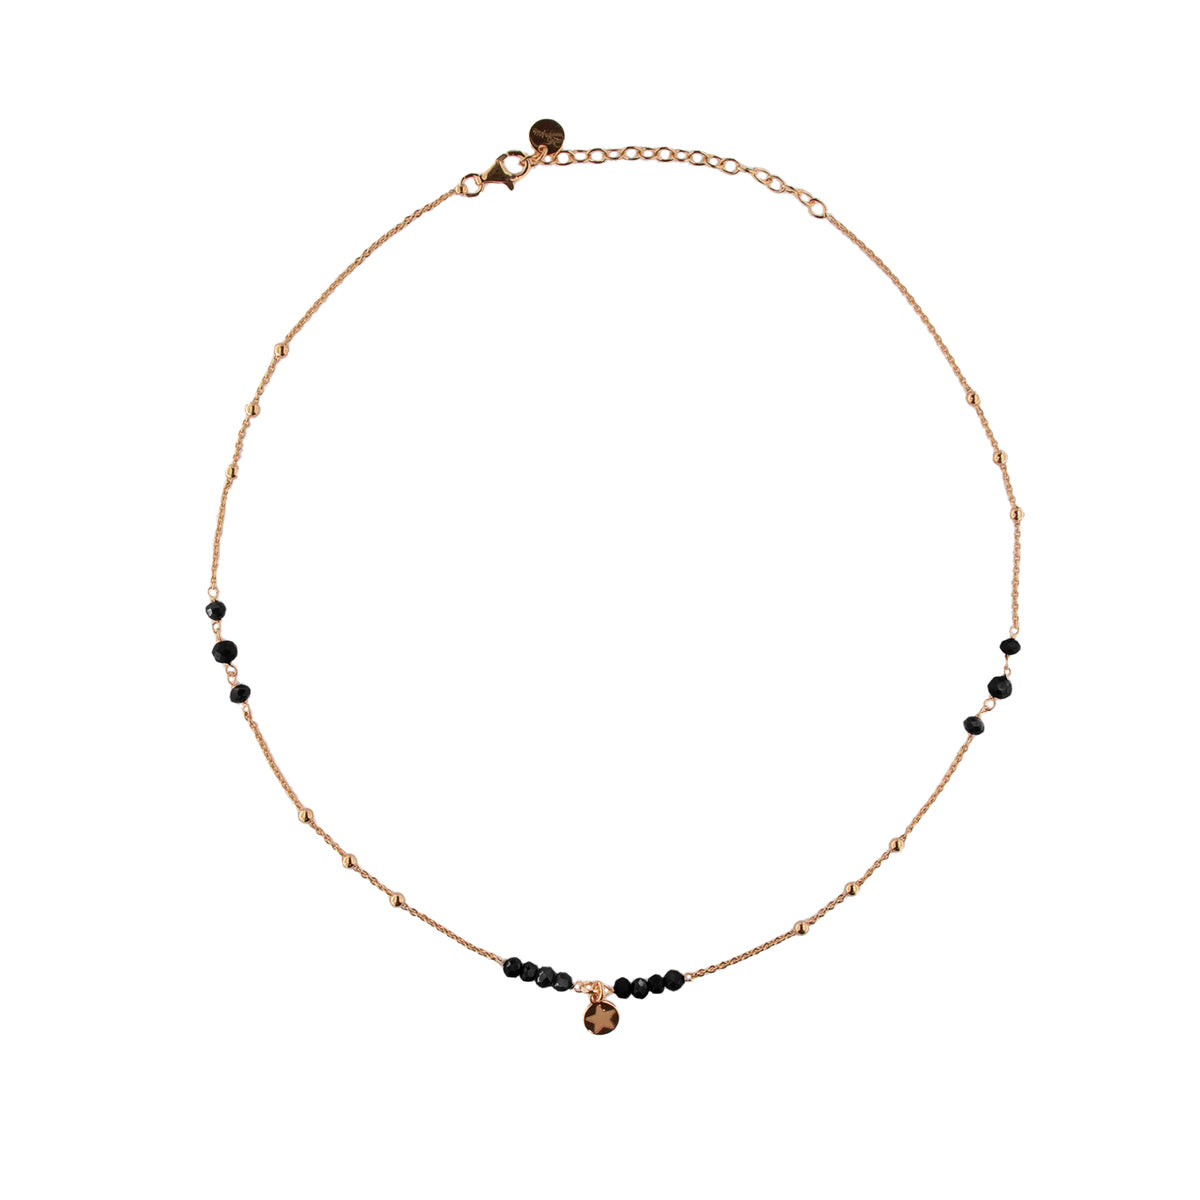 CHAINED NECKLACE - GIPSY TIERRA BLACK